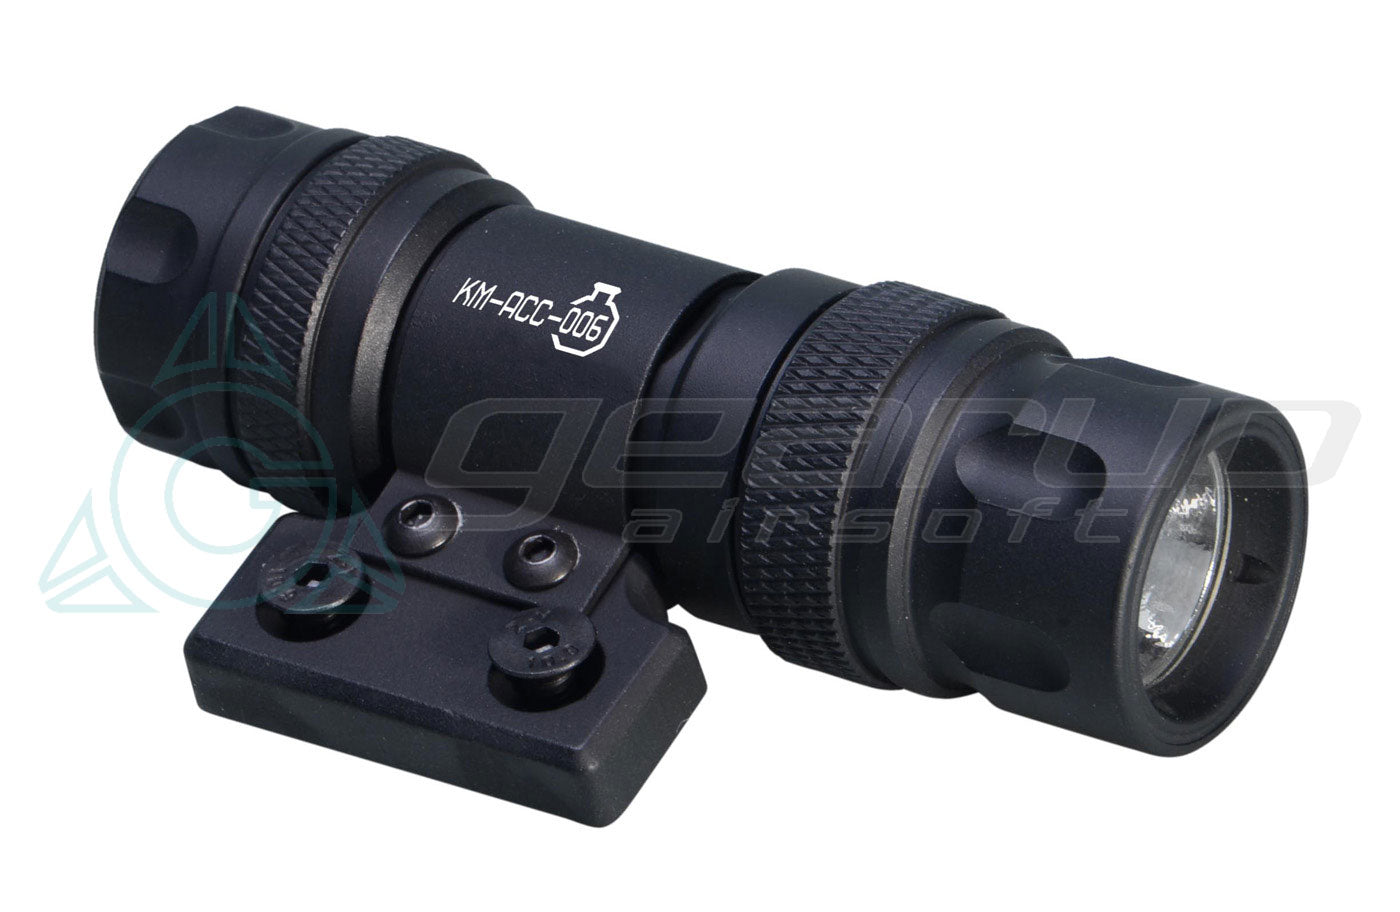 ARES FLASHLIGHT WITH MOUNT FOR KEY MOD SYSTEM